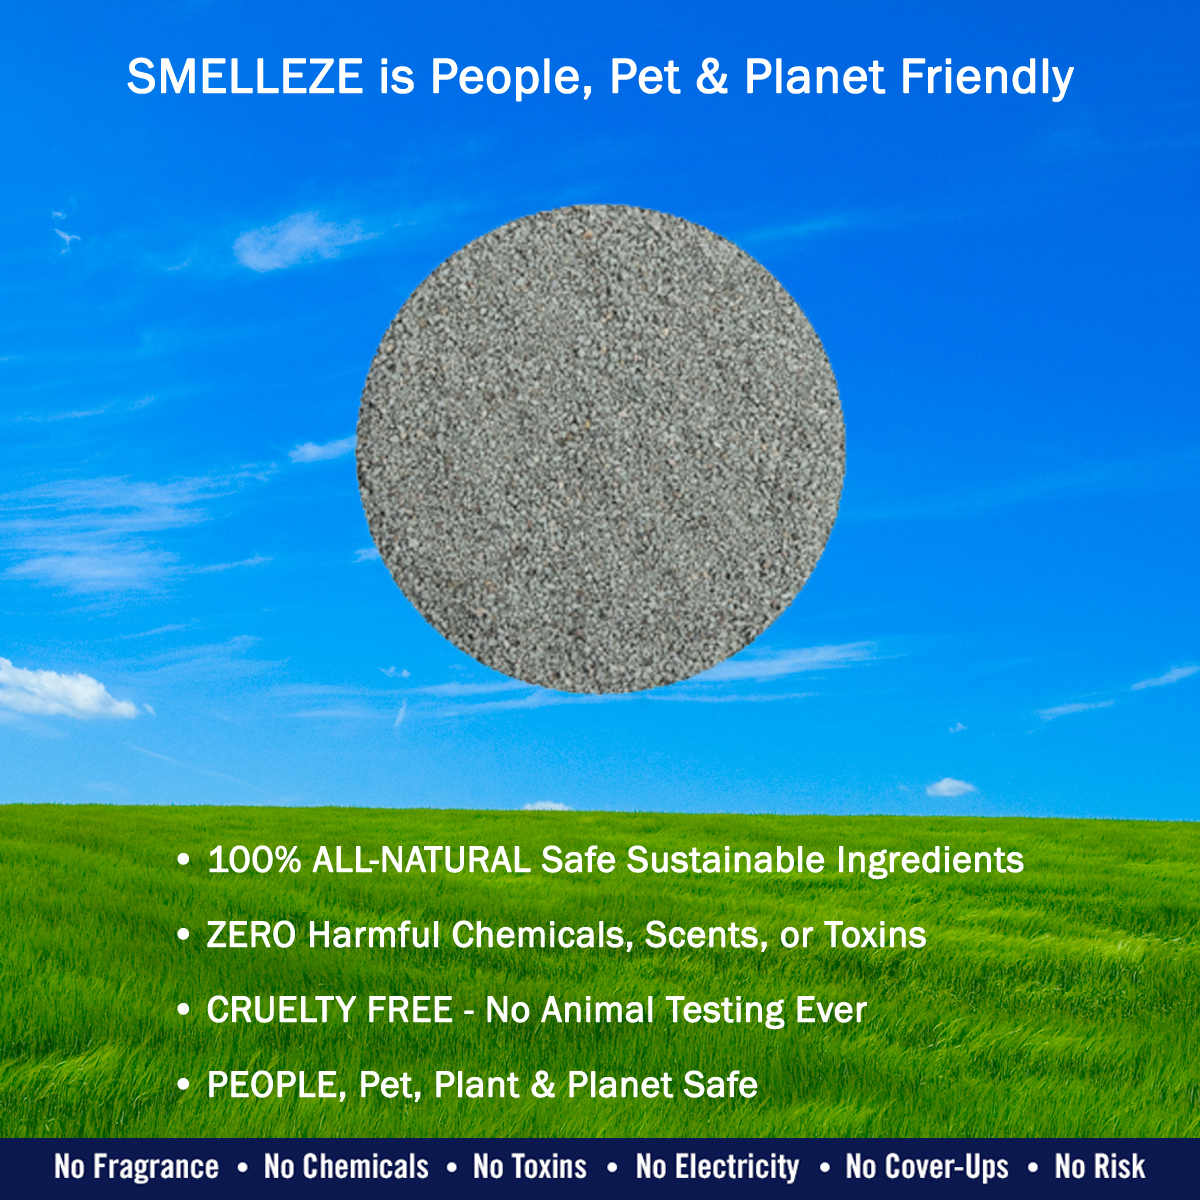 Smelleze Natural Moth Ball Smell Remover Deodorizer: 2 Lb. Granules Gets Mothball Fumes Out